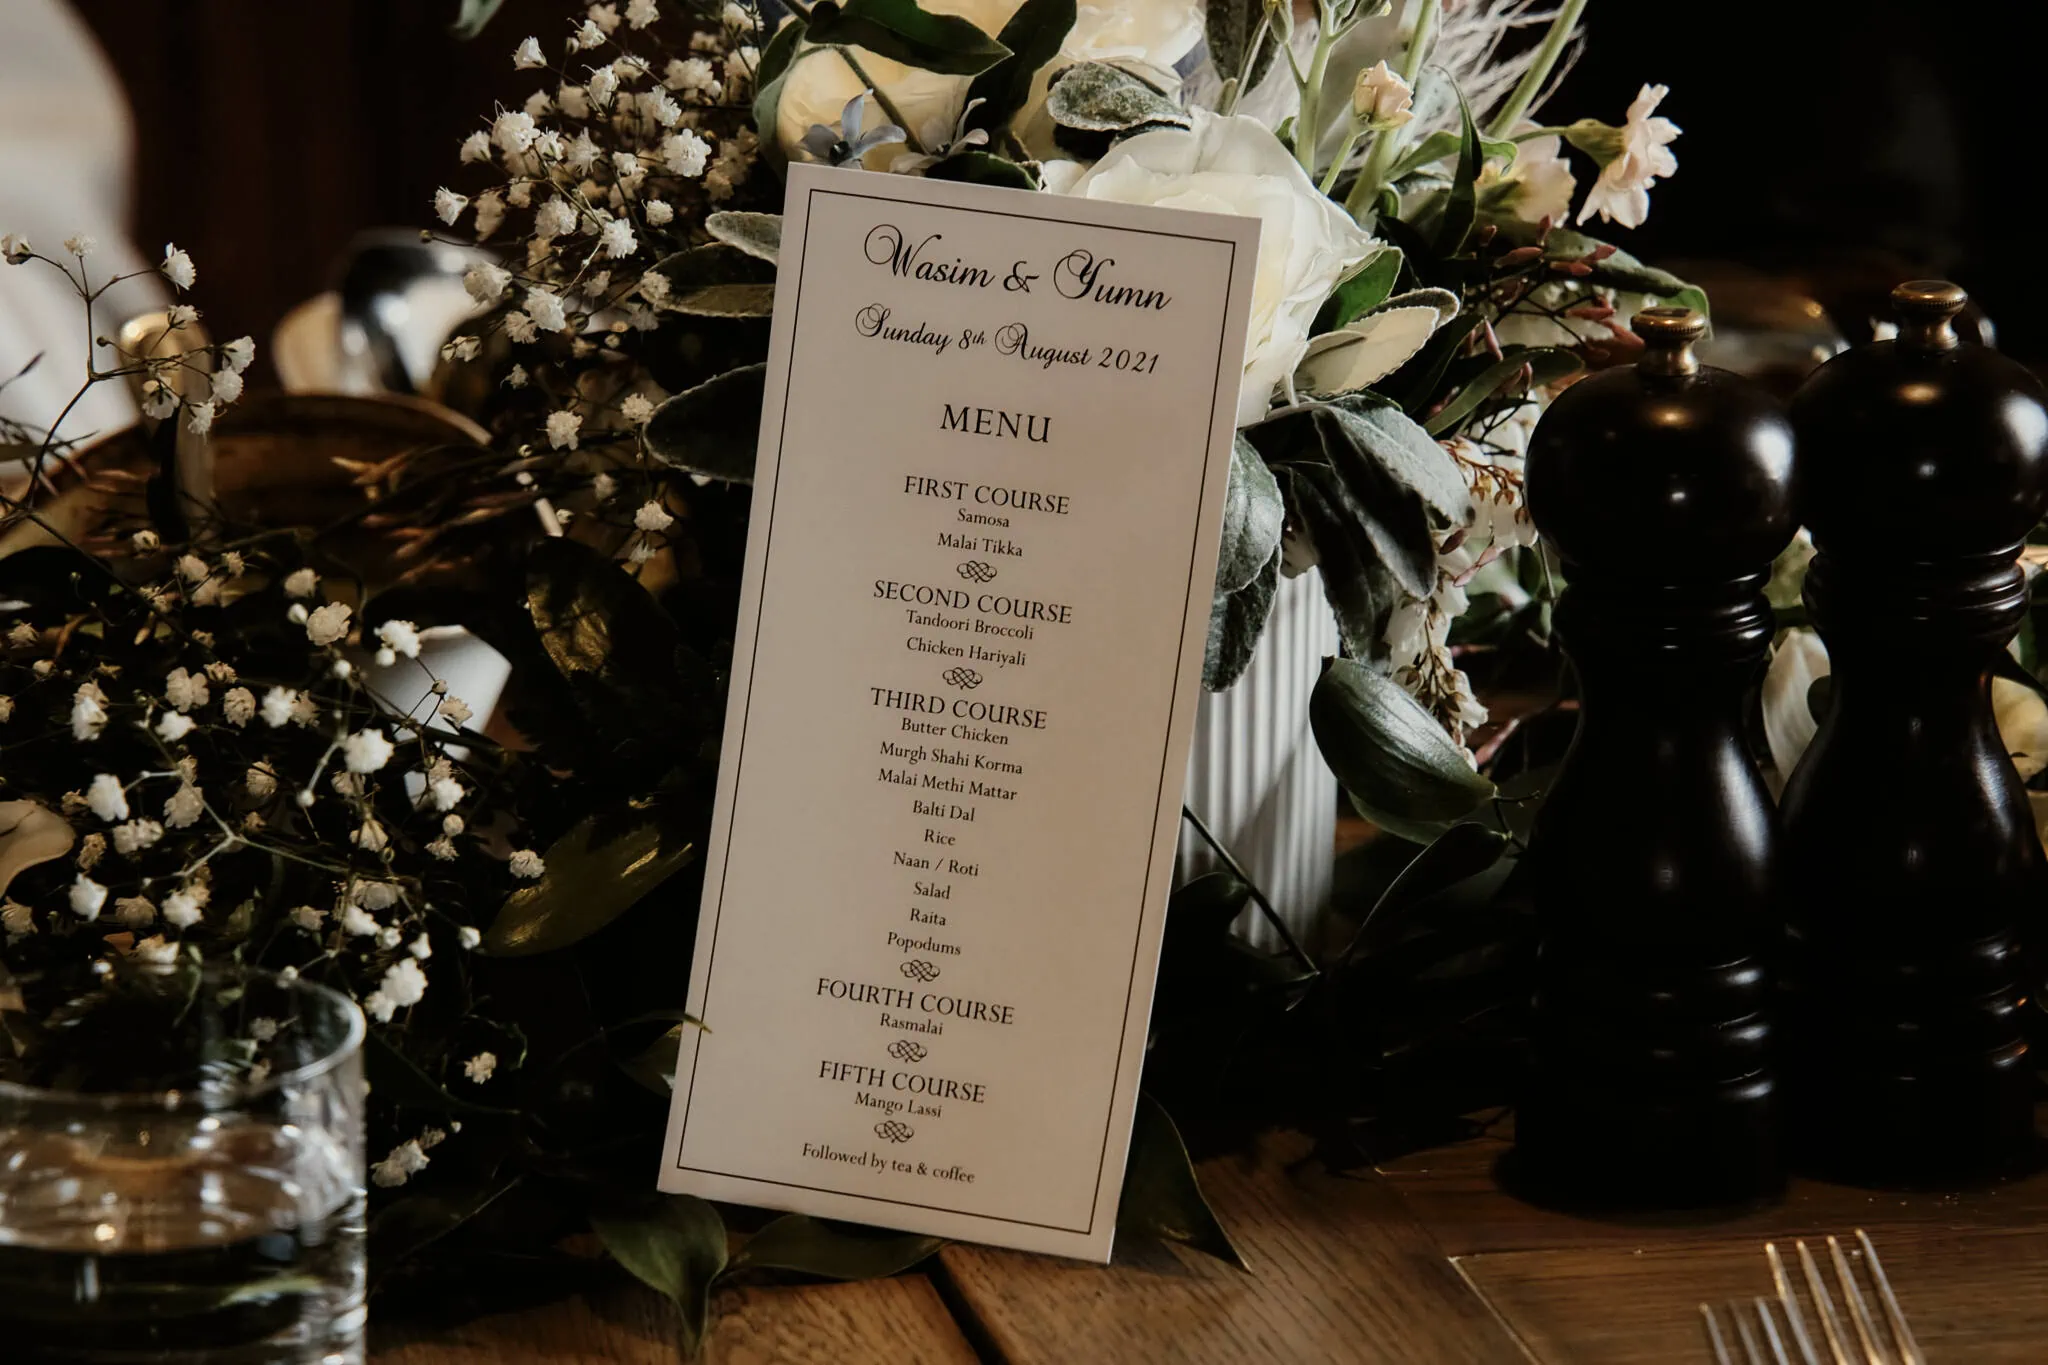 Queenstown New Zealand Elopement Wedding Photographer - A wedding menu for Wasim and Yumn's Queenstown Islamic wedding is sitting on a table.